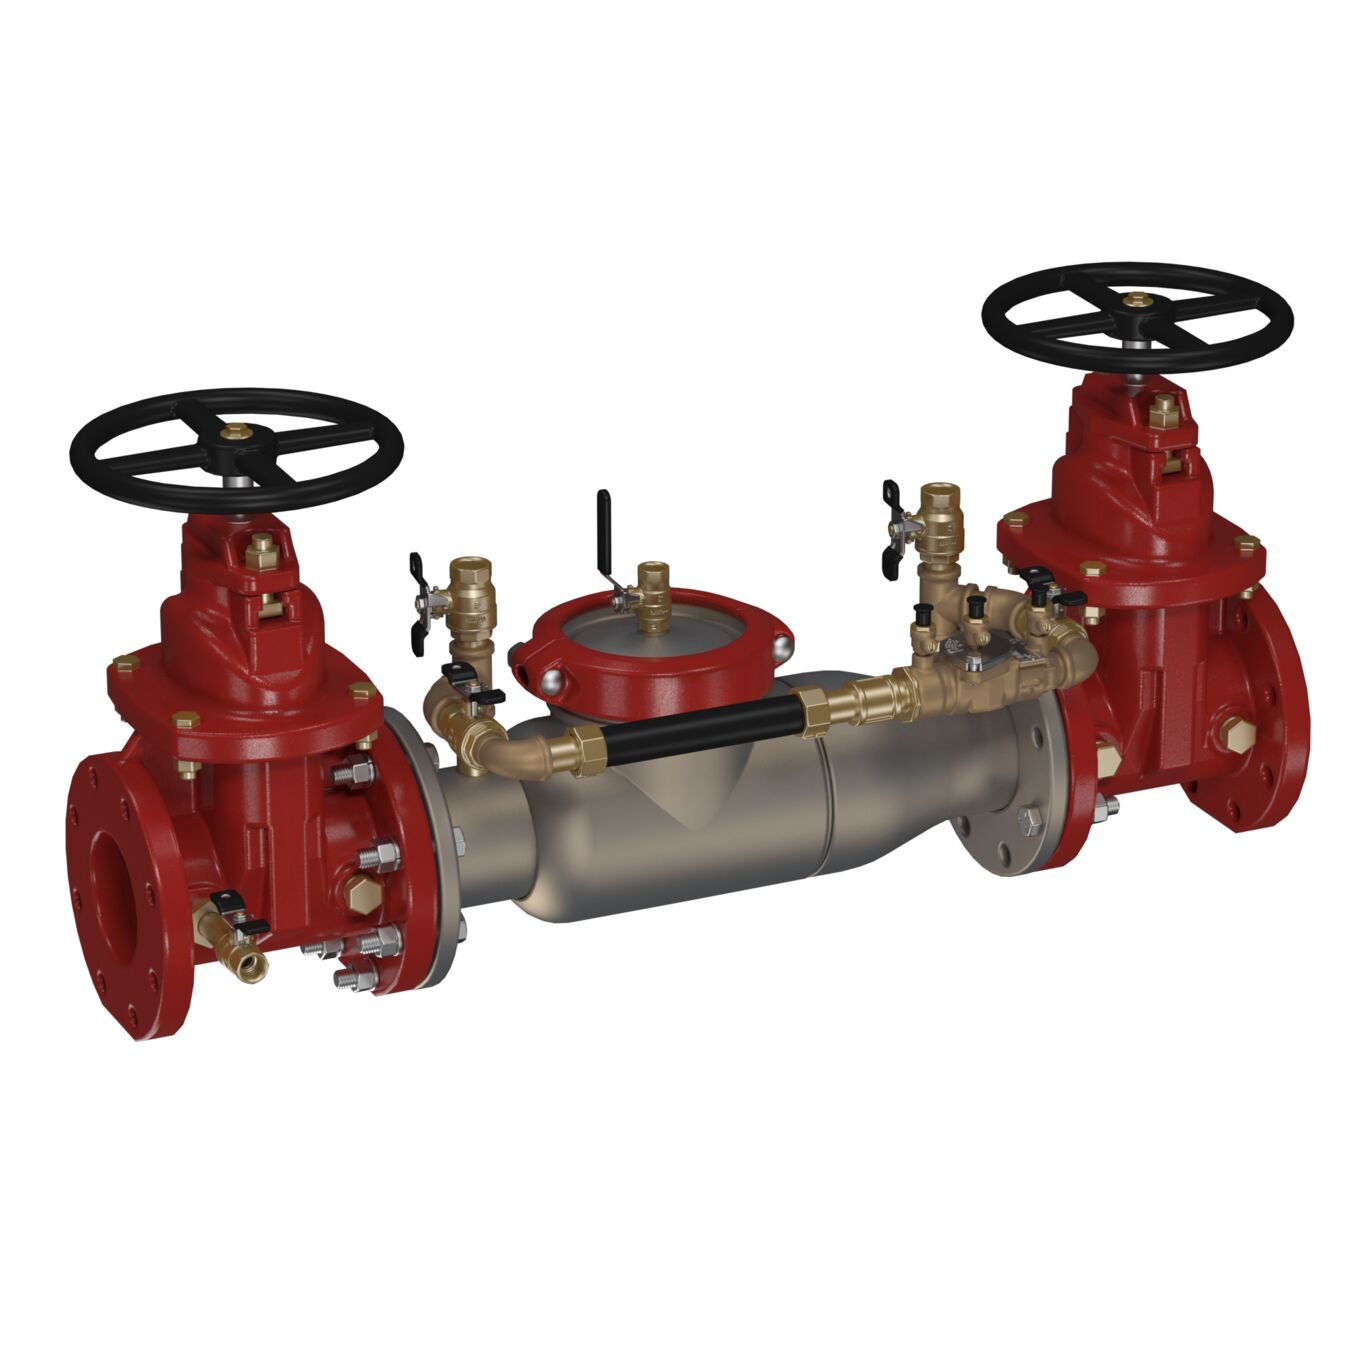 Stainless Steel Double Check Detector Backflow Preventer Assembly, Domestic NRS Shutoffs, Cam-Check Valves, Less Meter